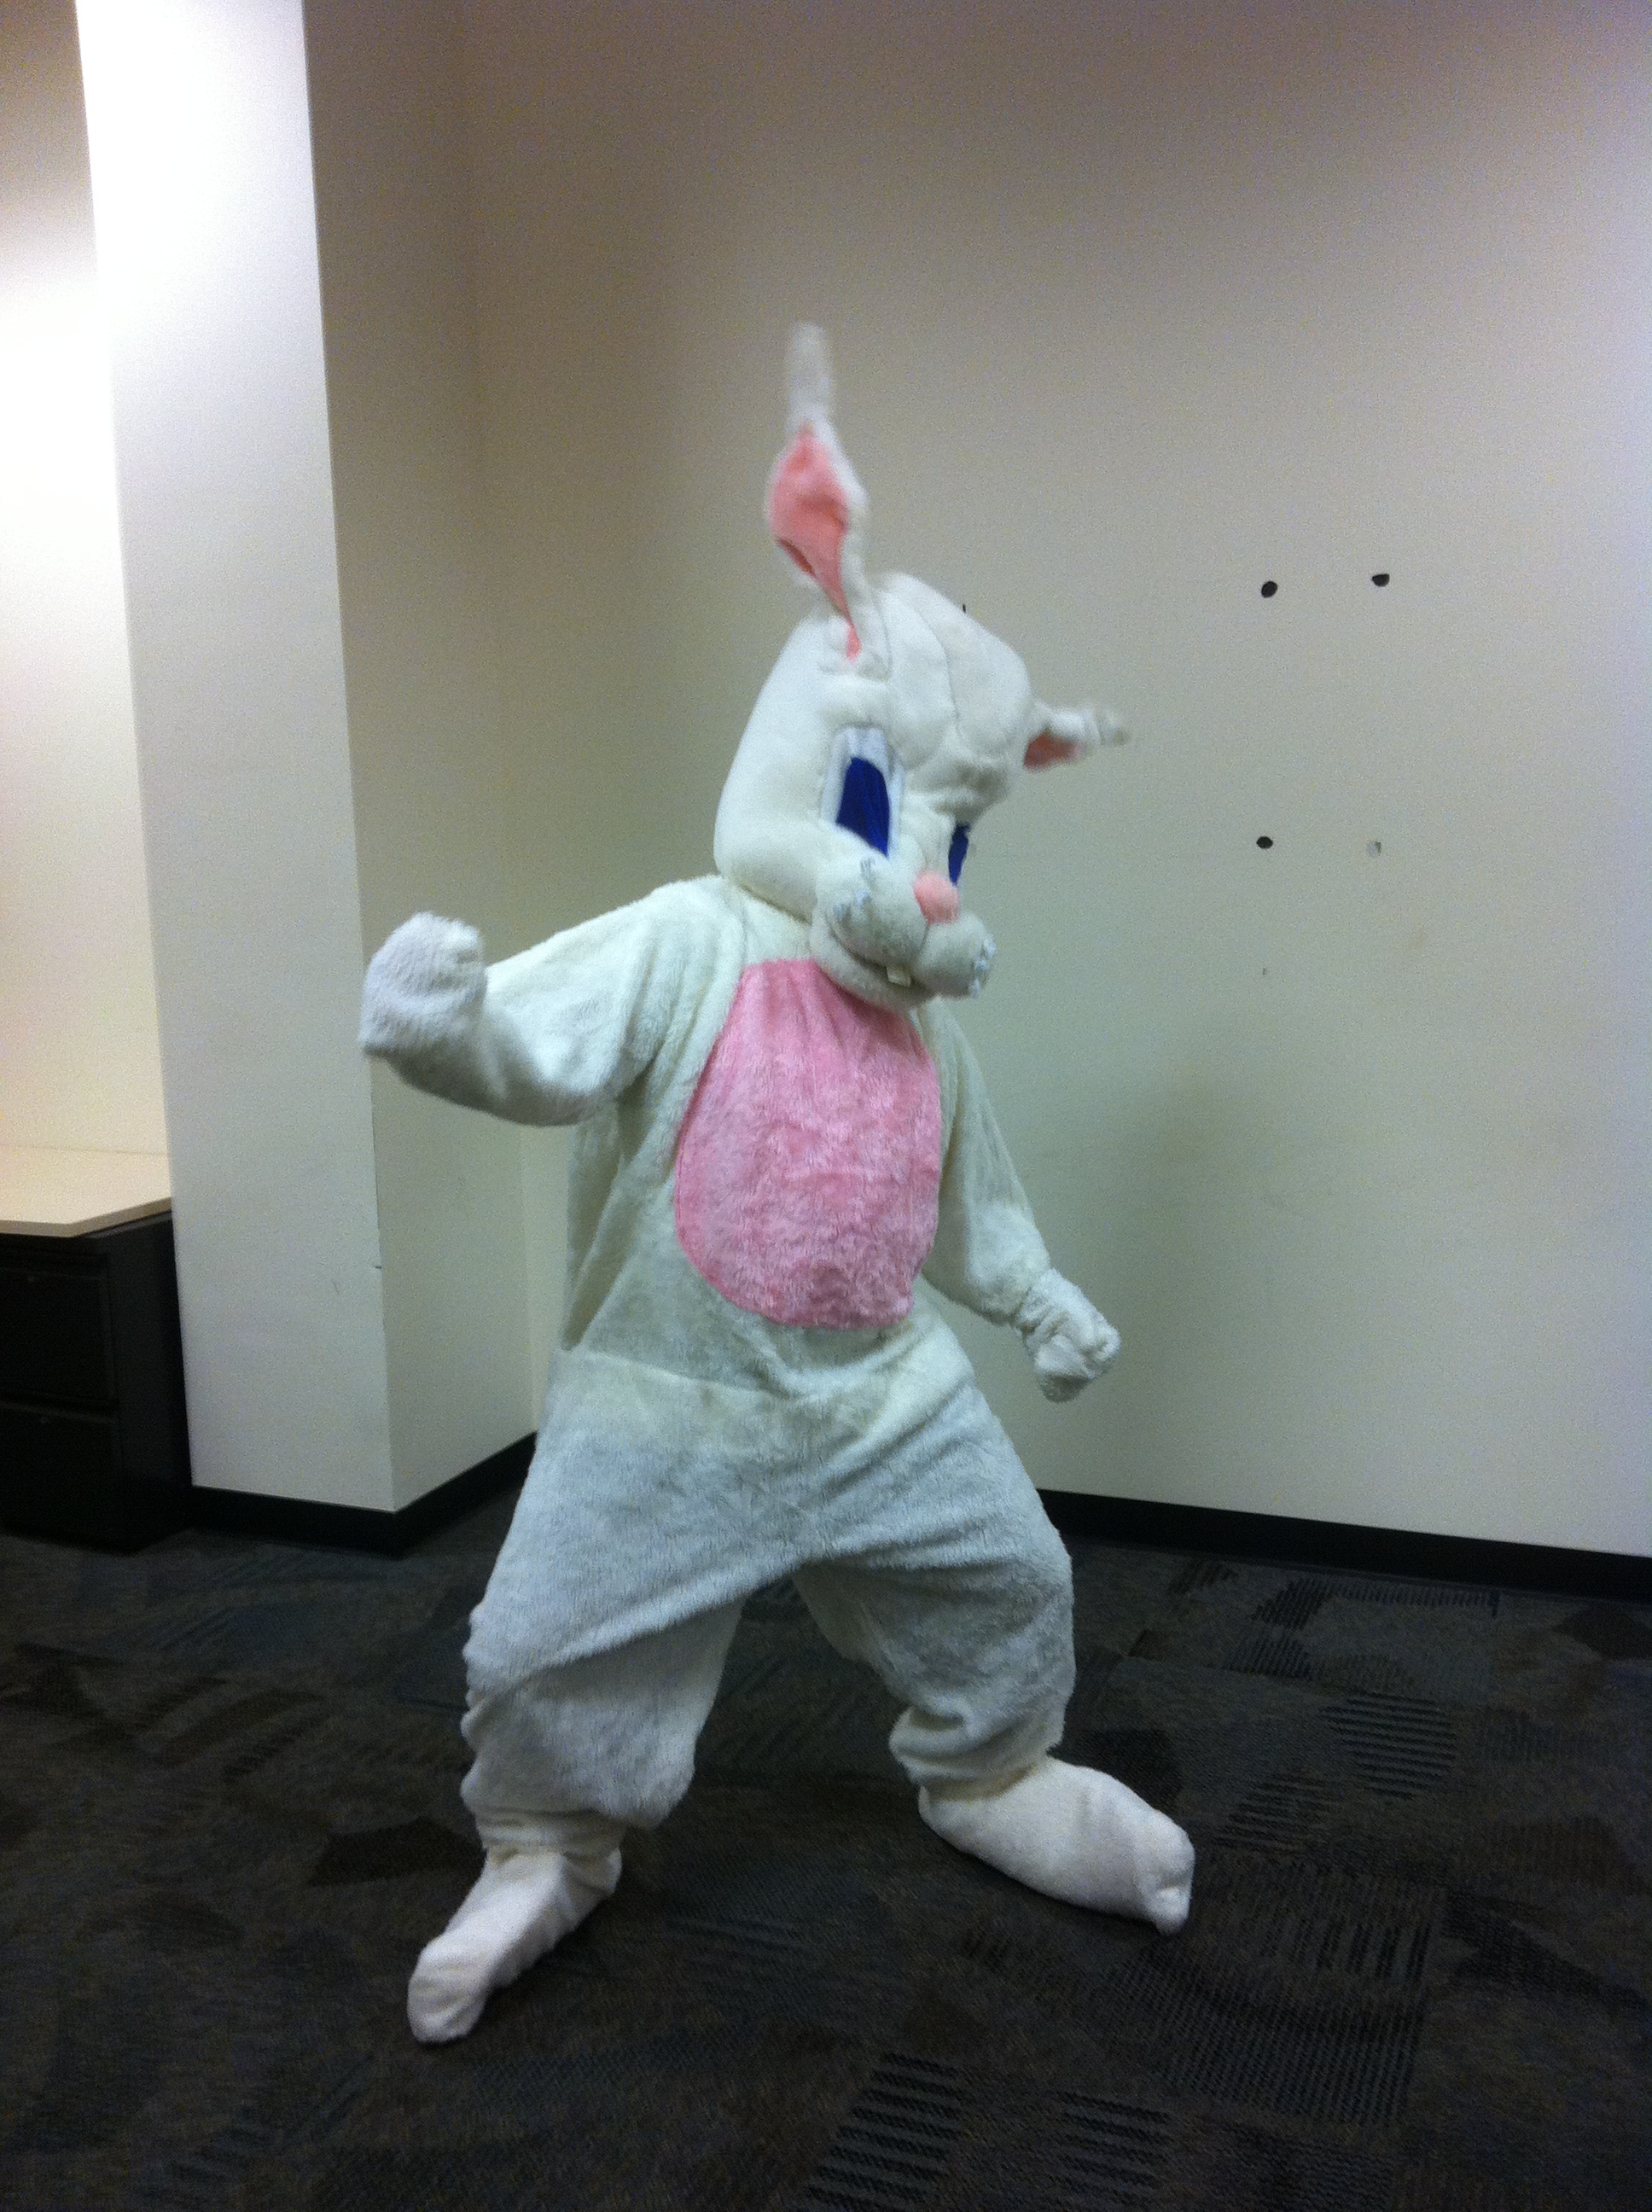 This was actually me back during Easter and my work...I had to dress up as the Easter Bunny for Pictures with the employees kid.  It was like a million degrees in that thing and I wore it for about 3 hours!